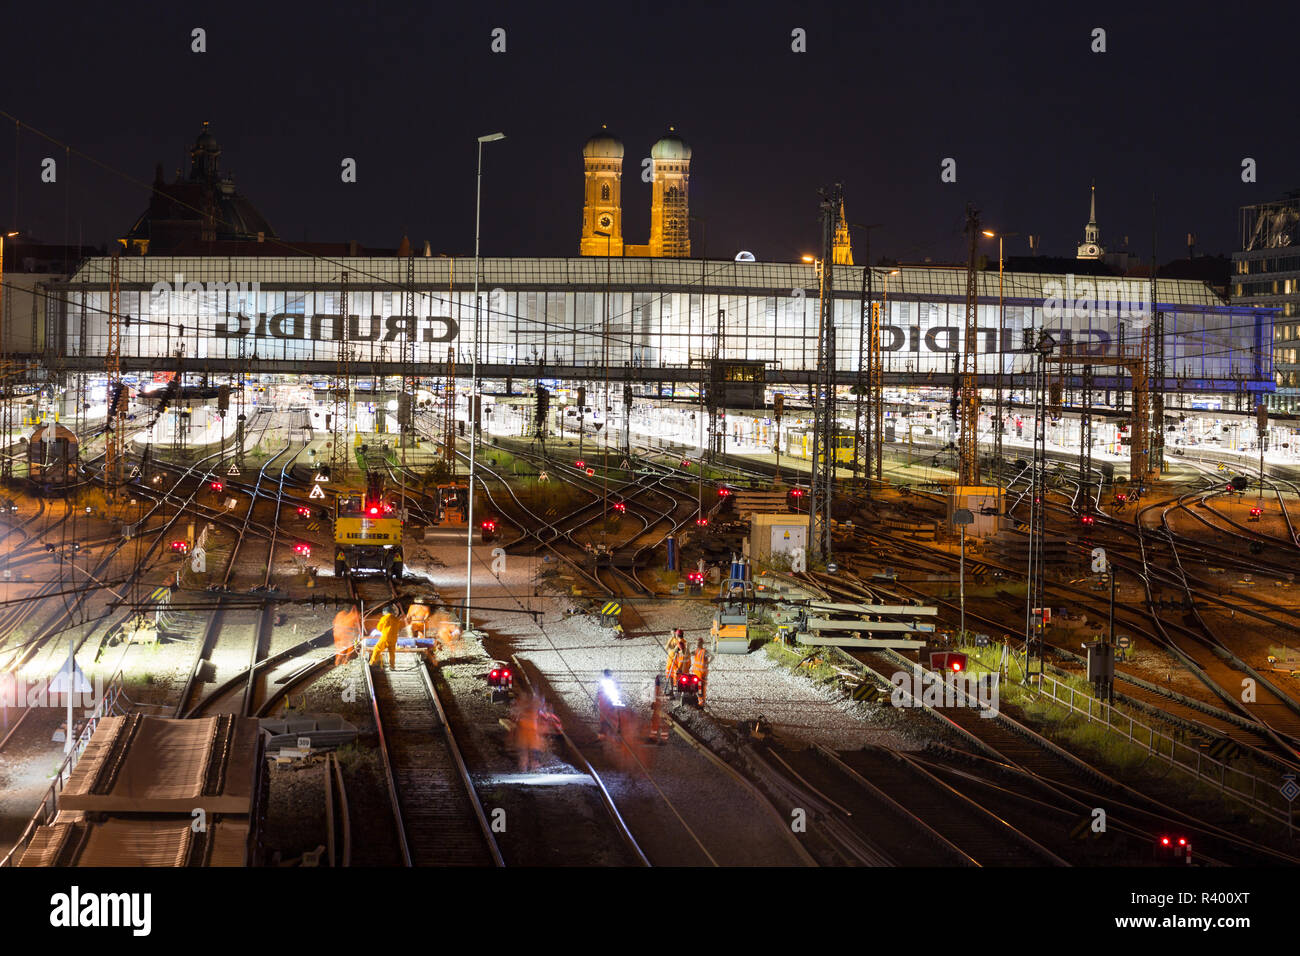 Illuminated central station with tracks at night, behind Church of Our Lady, Munich, Germany Stock Photo